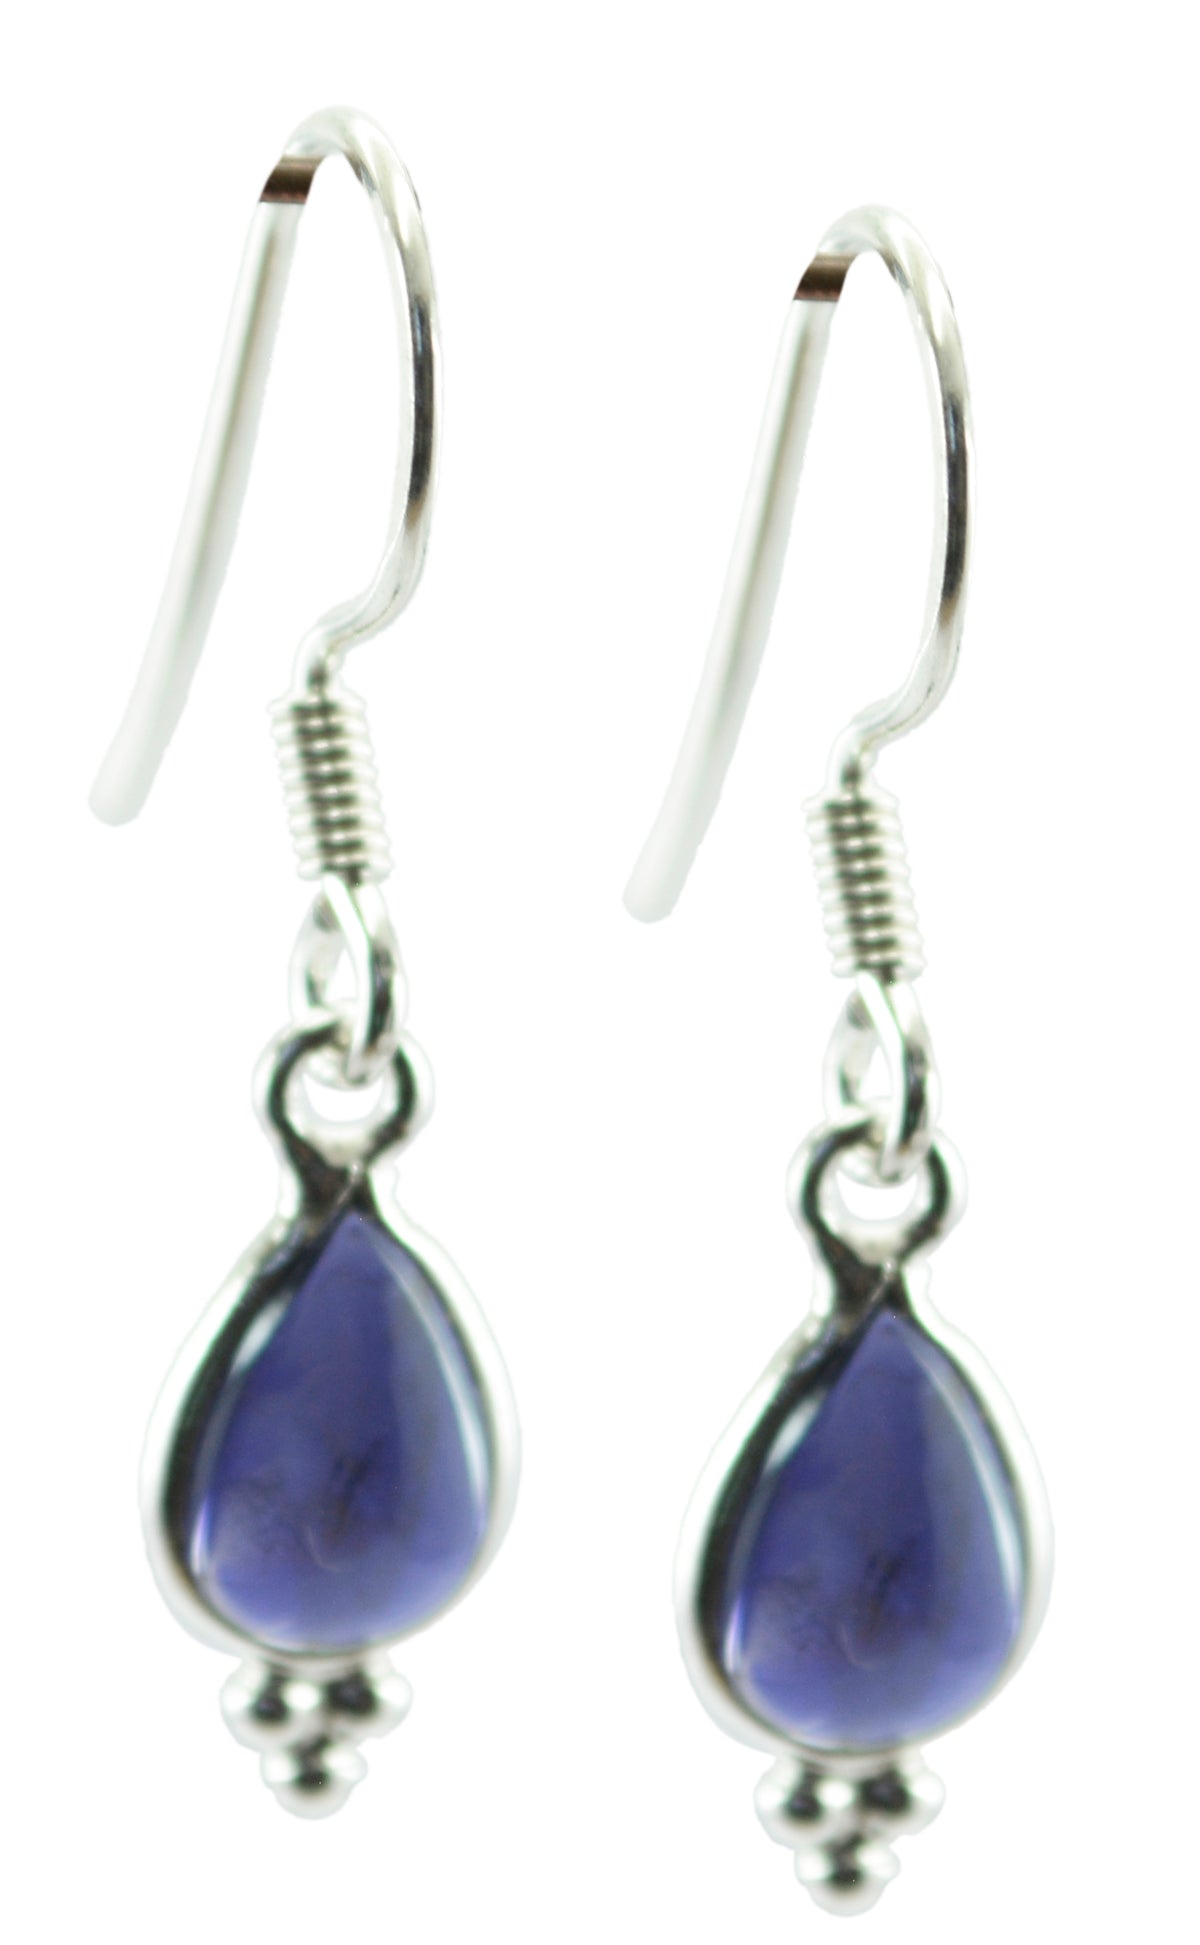 Riyo Real Gemstones pear Cabochon Nevy Blue Iolite Silver Earring gift for independence